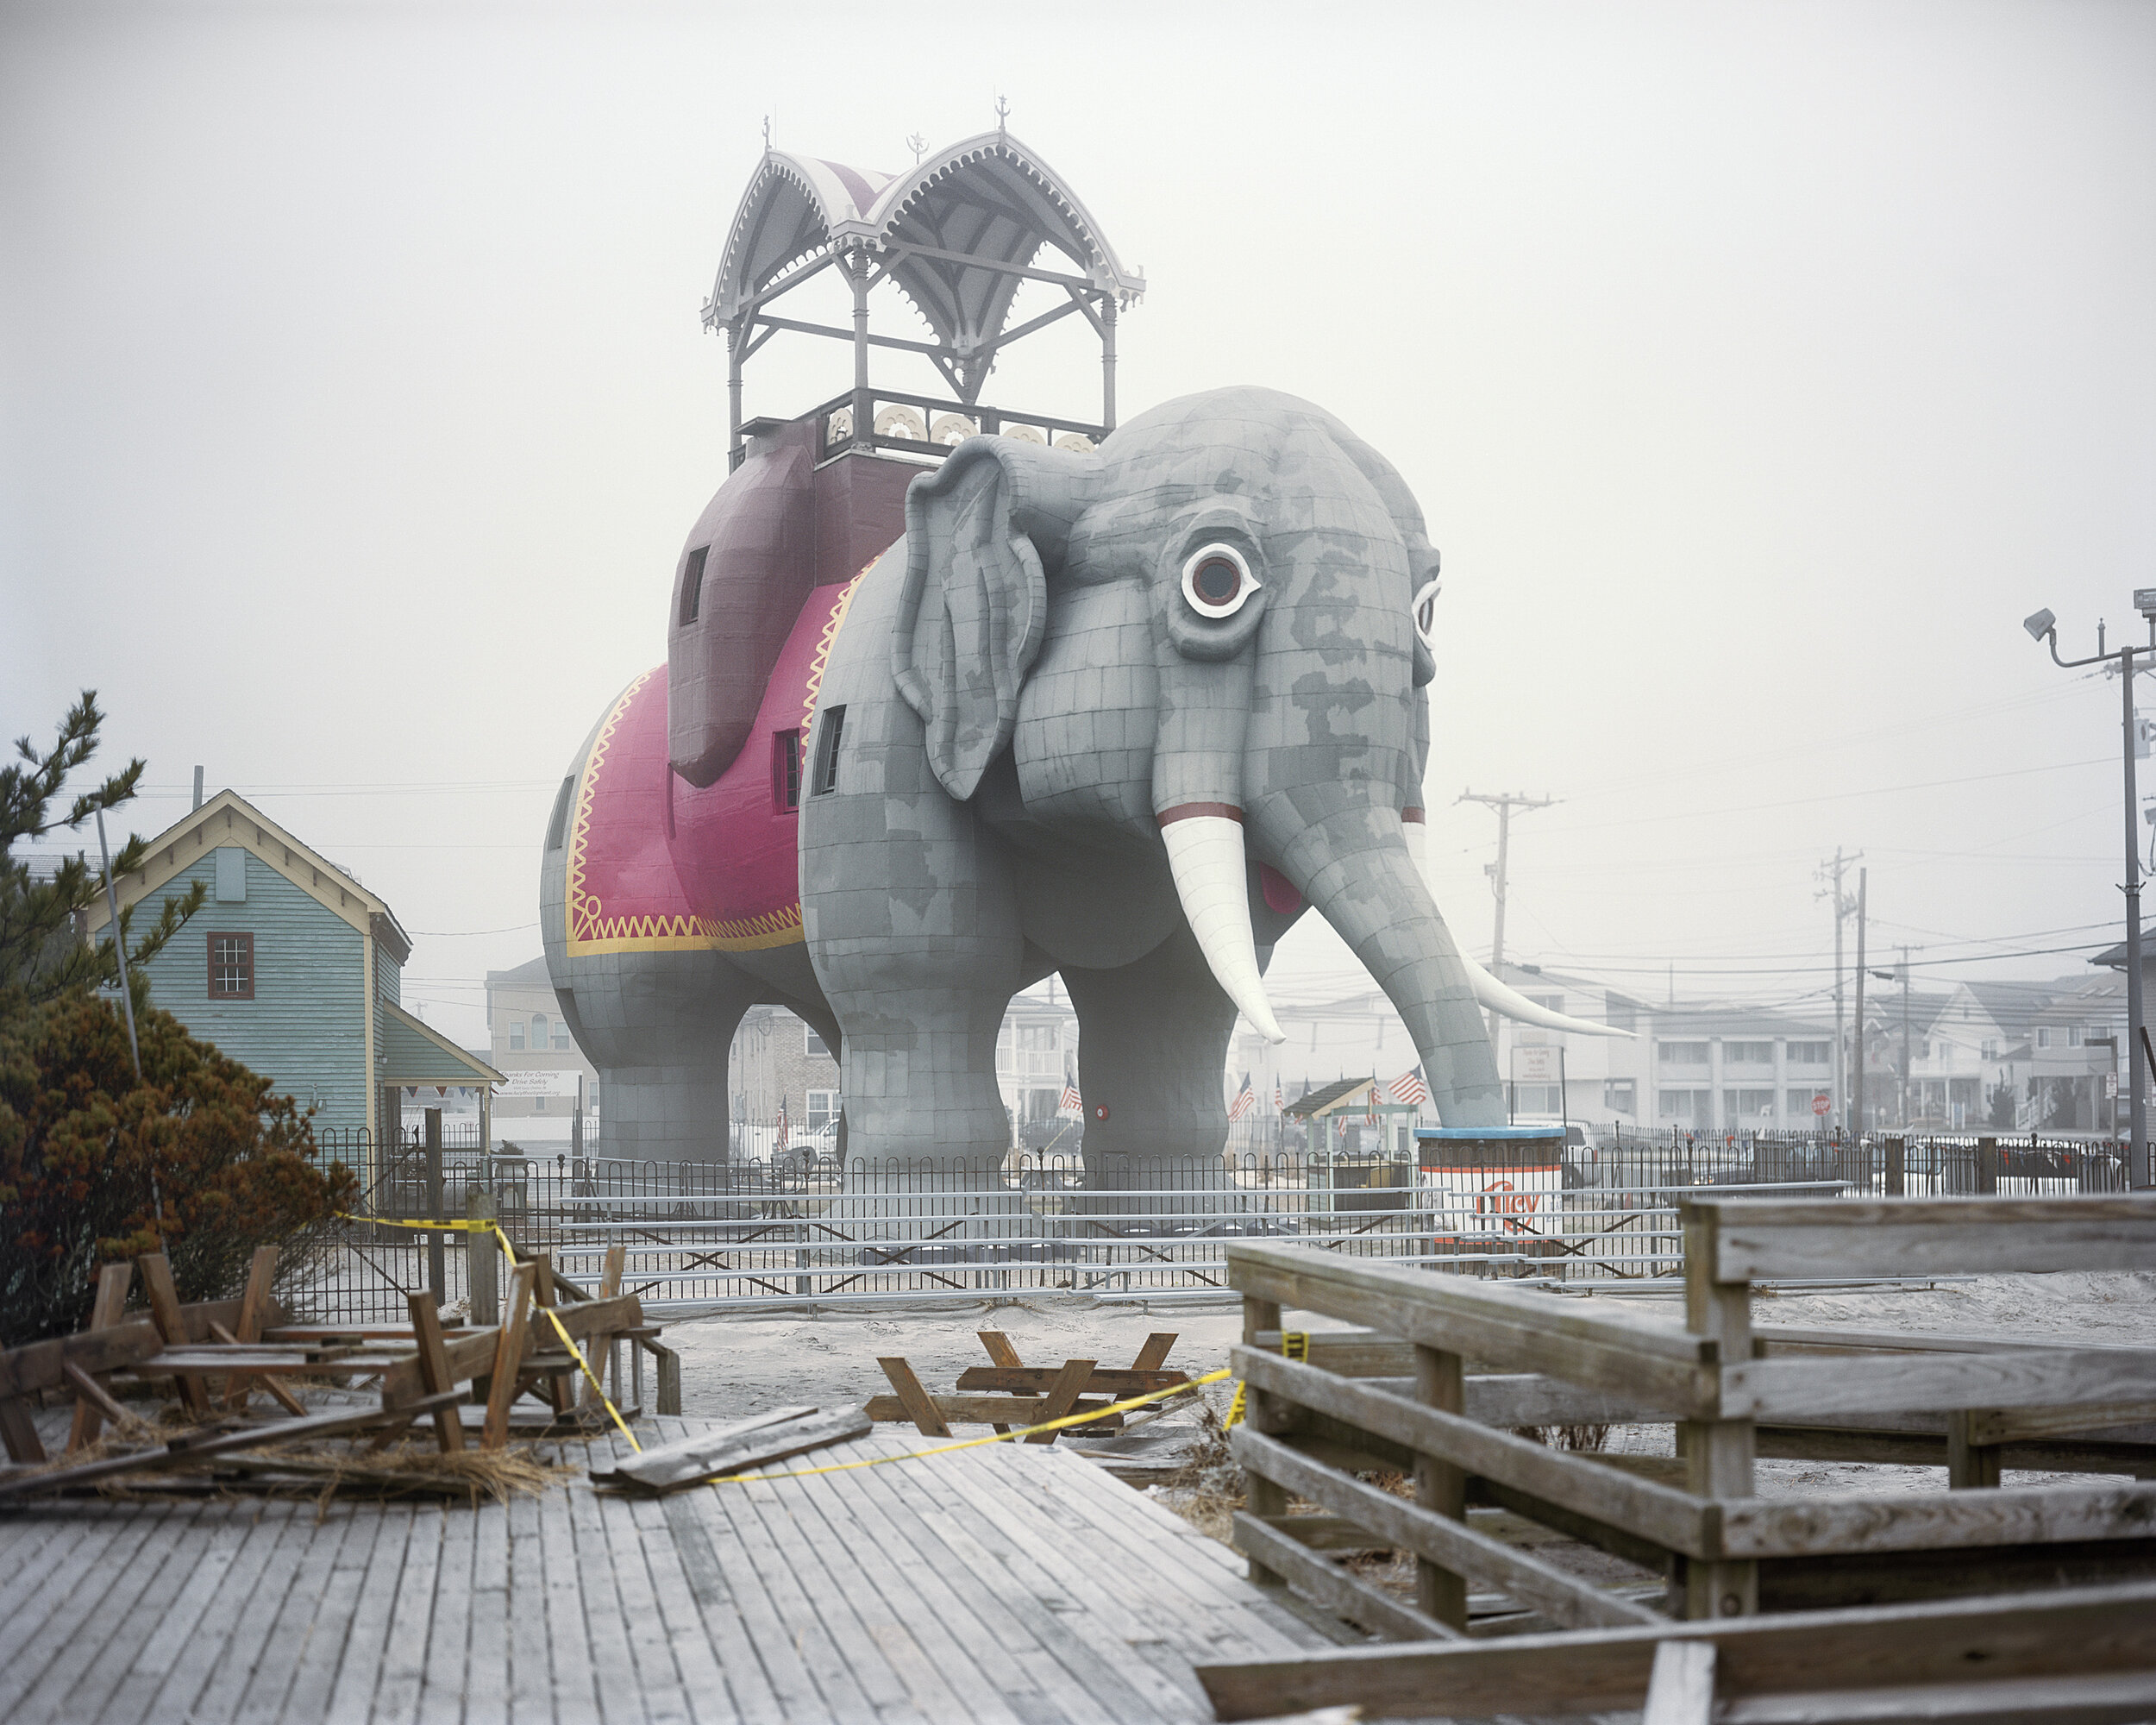 Lucy the Elephant, After Hurricane Sandy, Margate City, NJ. 